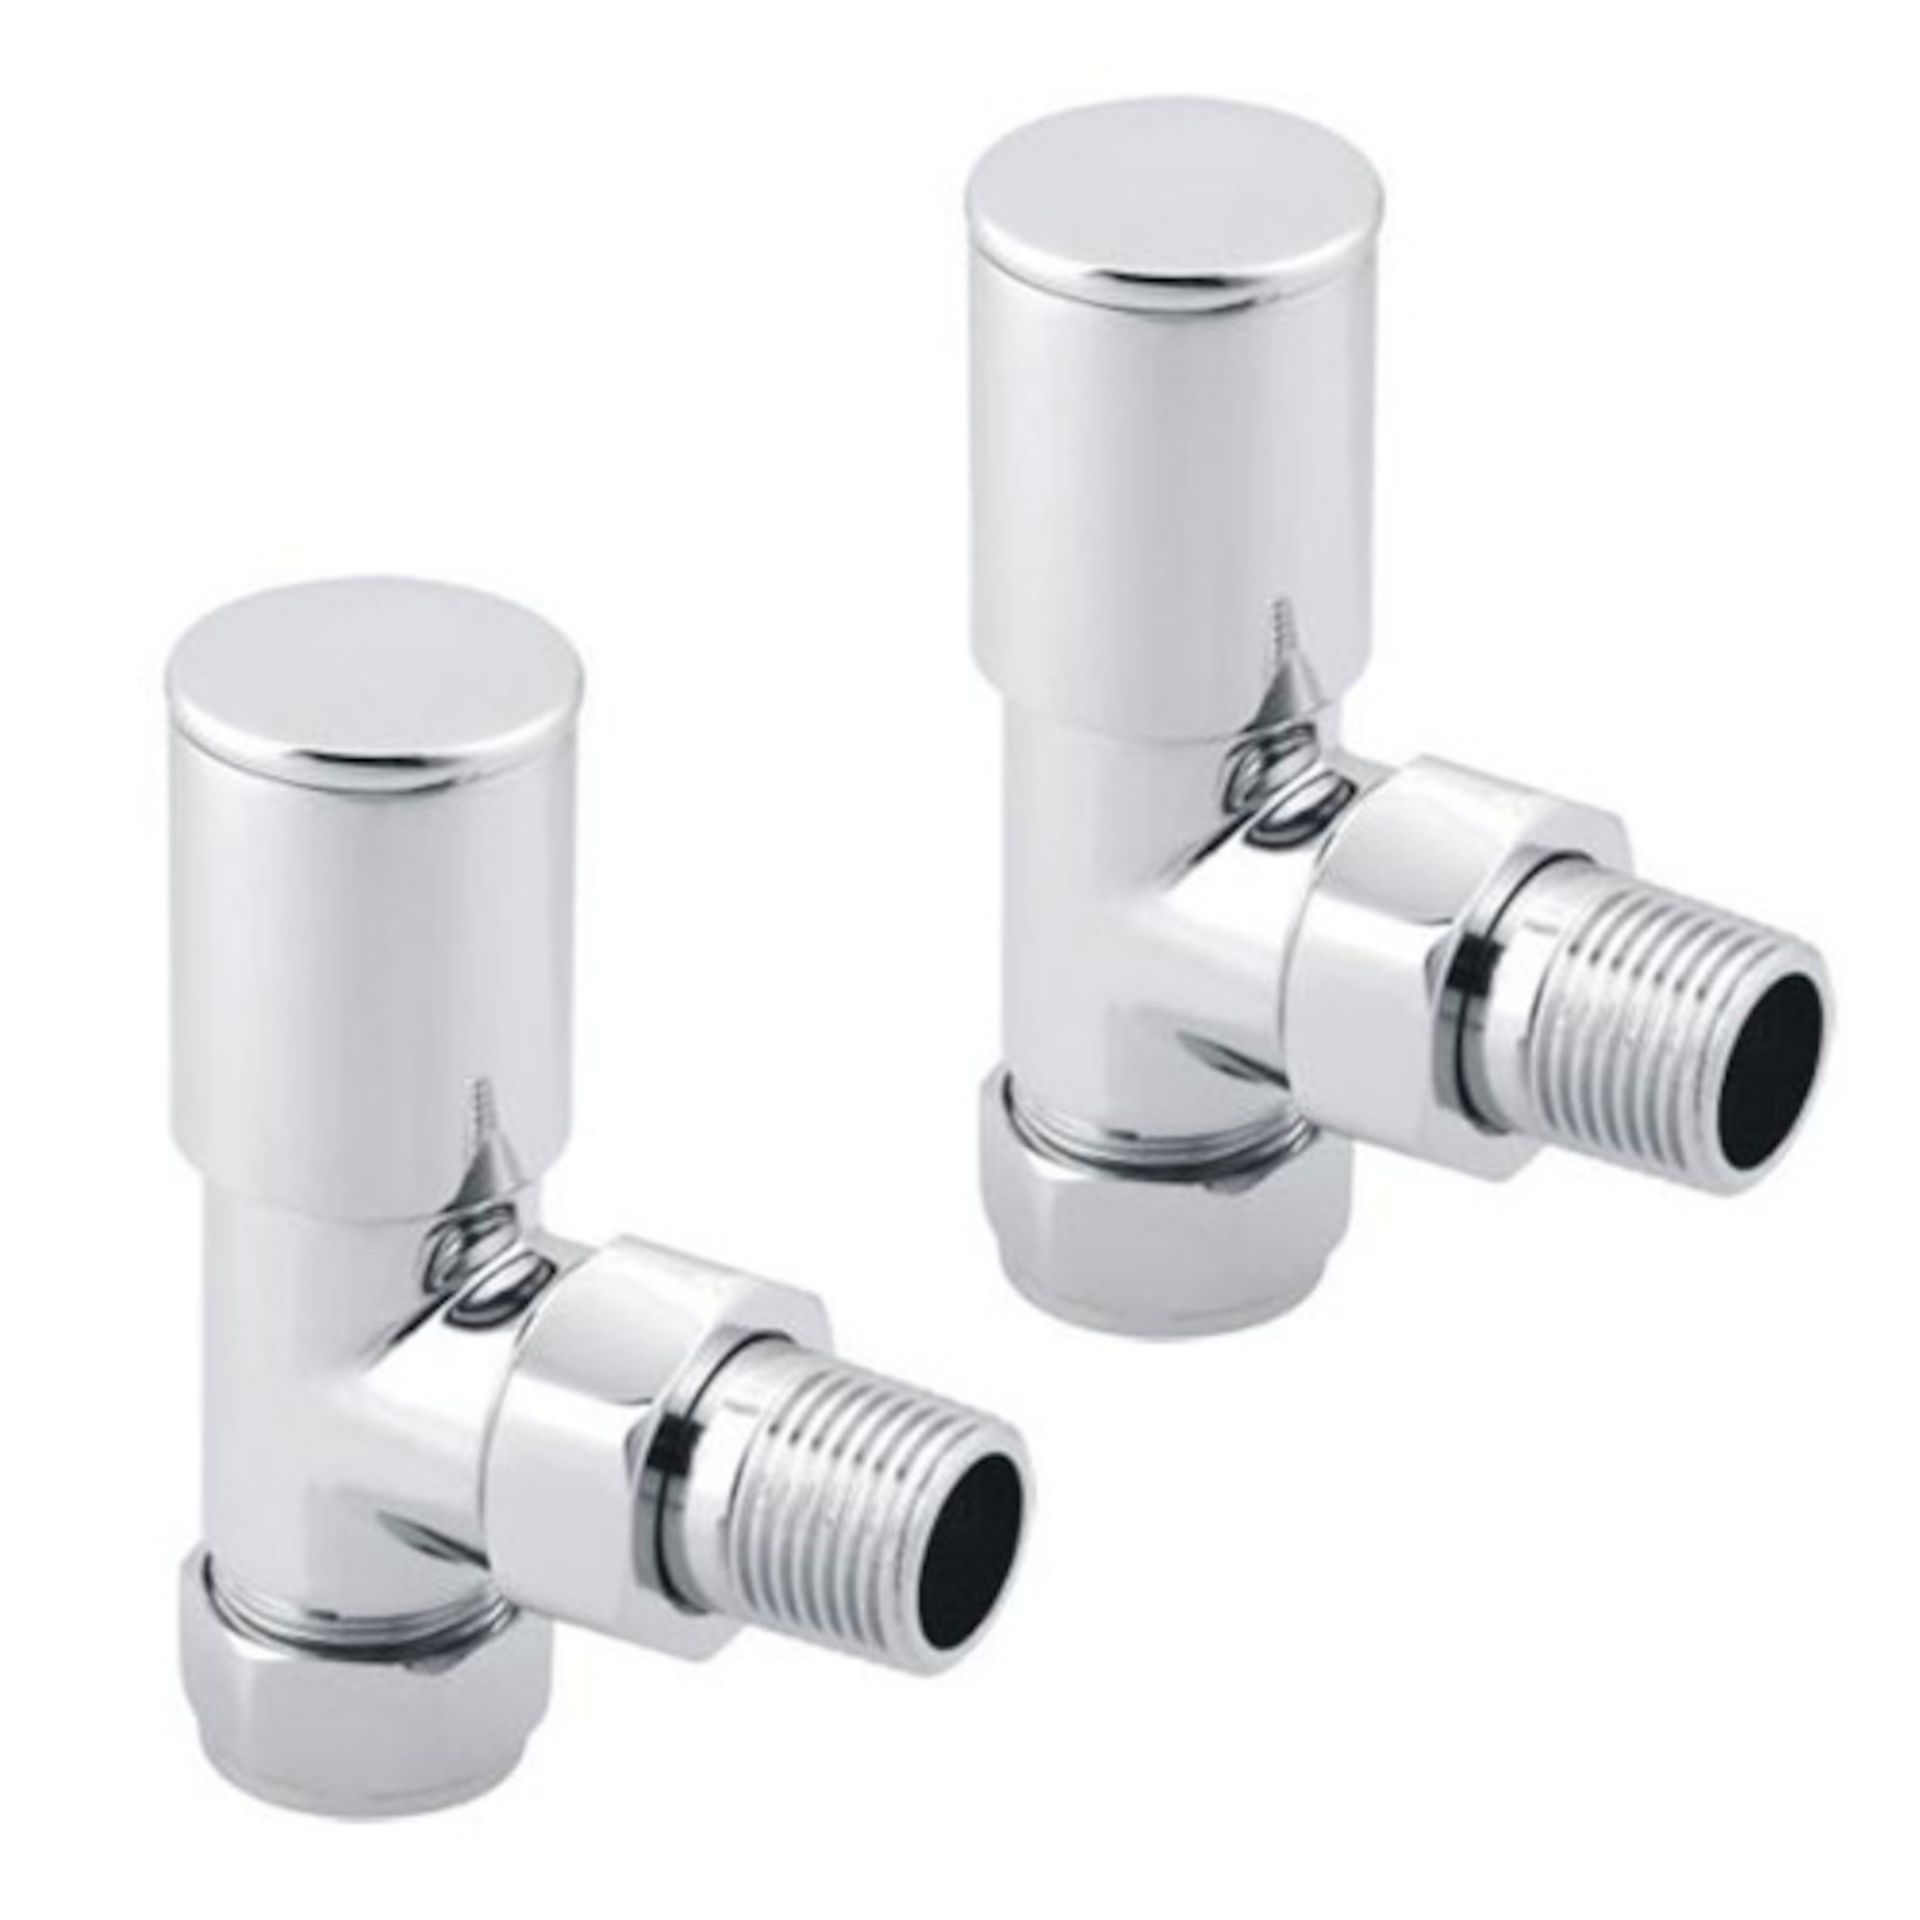 (PT225) 15mm Standard Connection Angled Radiator Valves - Heavy Duty Polished Chrome Plated Brass - Image 2 of 2